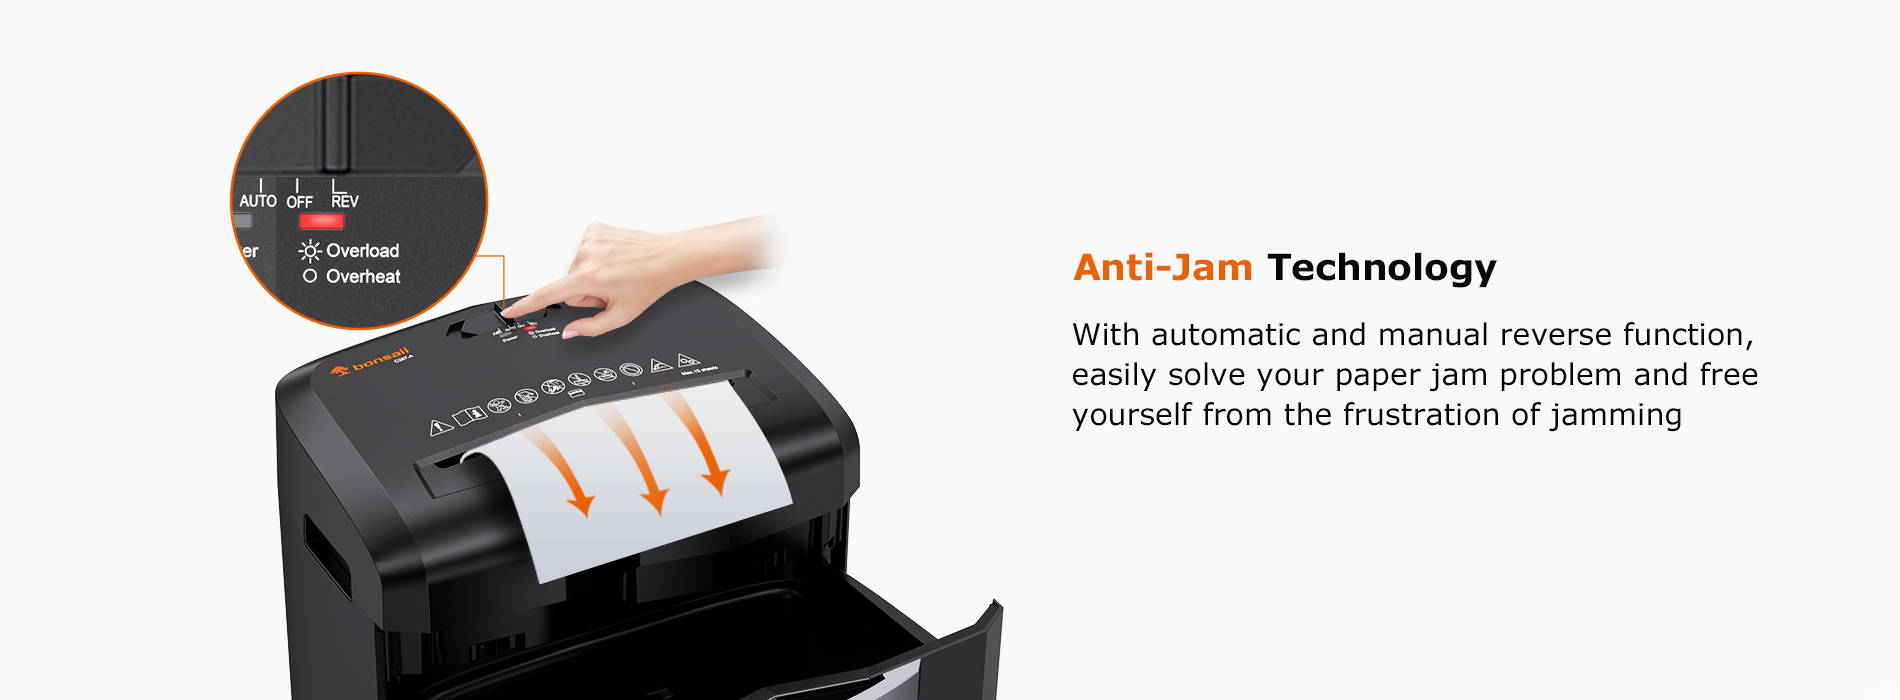 Anti-Jam Technology  With automatic and manual reverse function, easily solve your paper jam problem and free yourself from the frustration of jamming